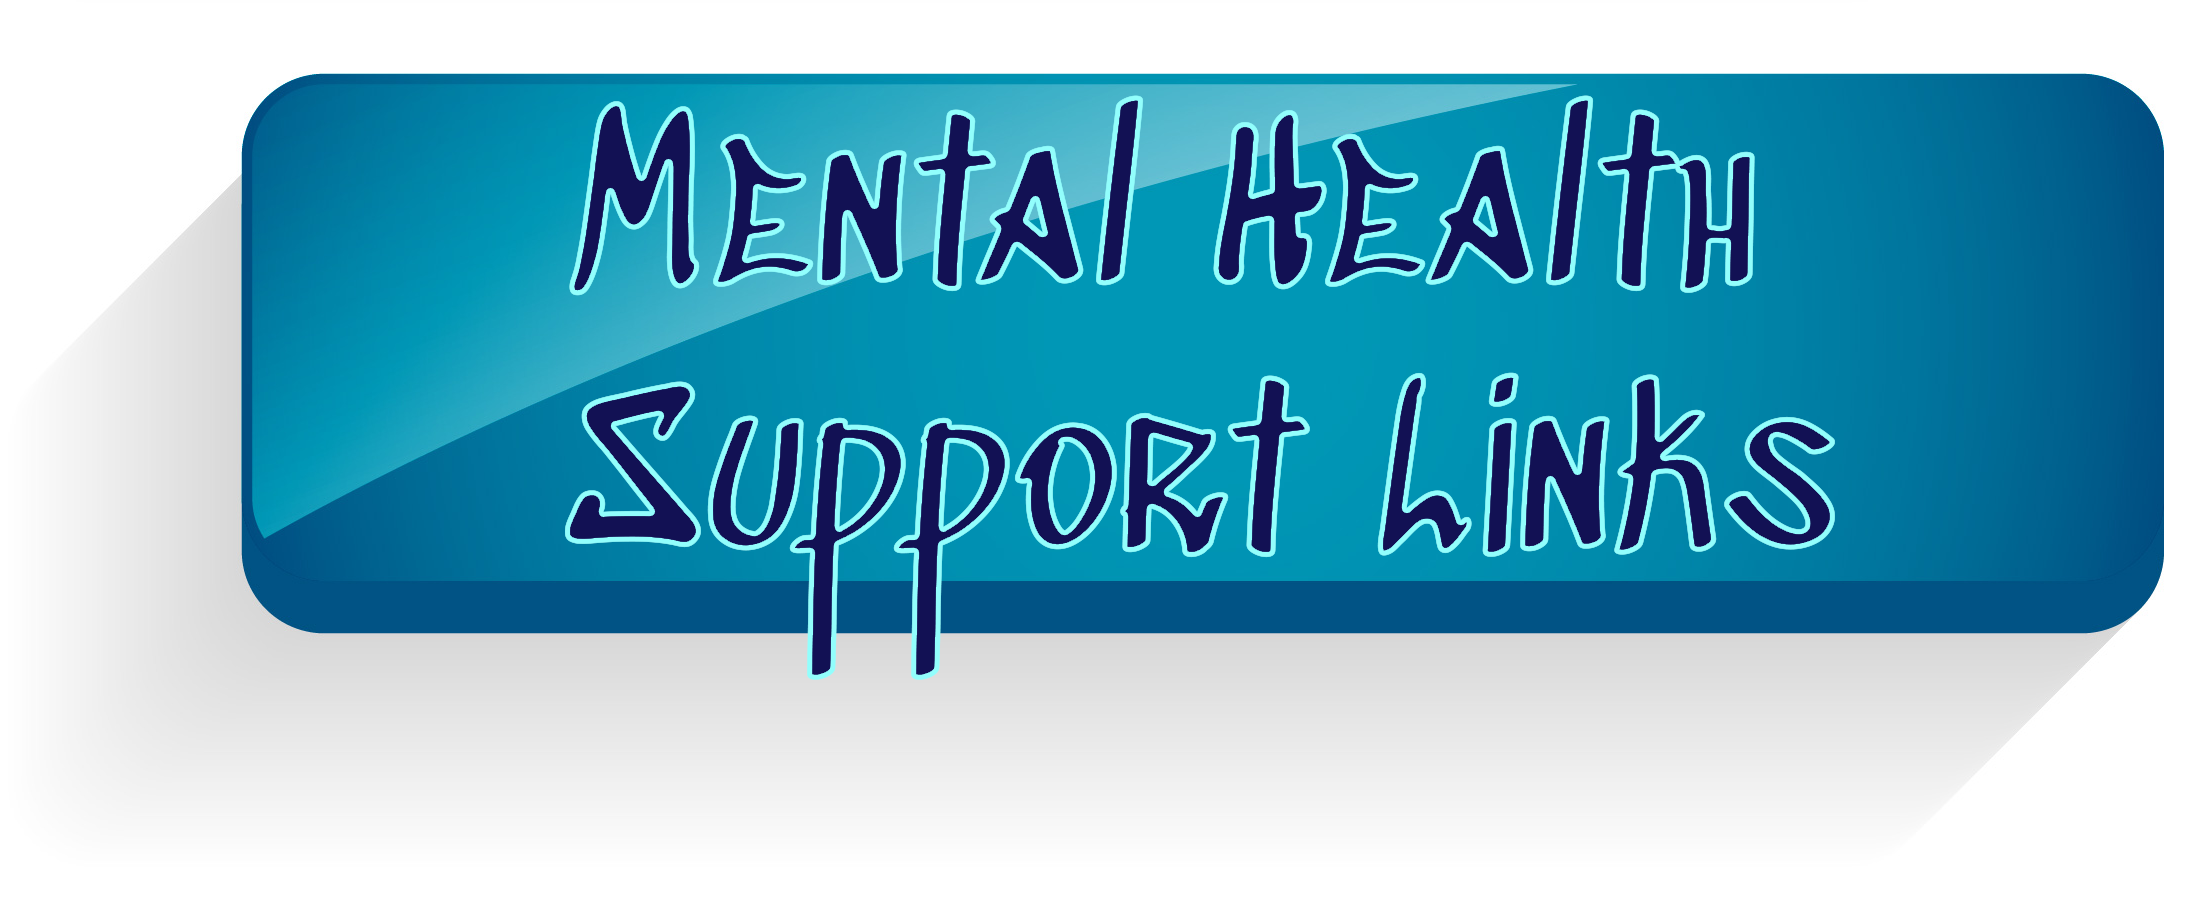 Mental Health Support Links Button